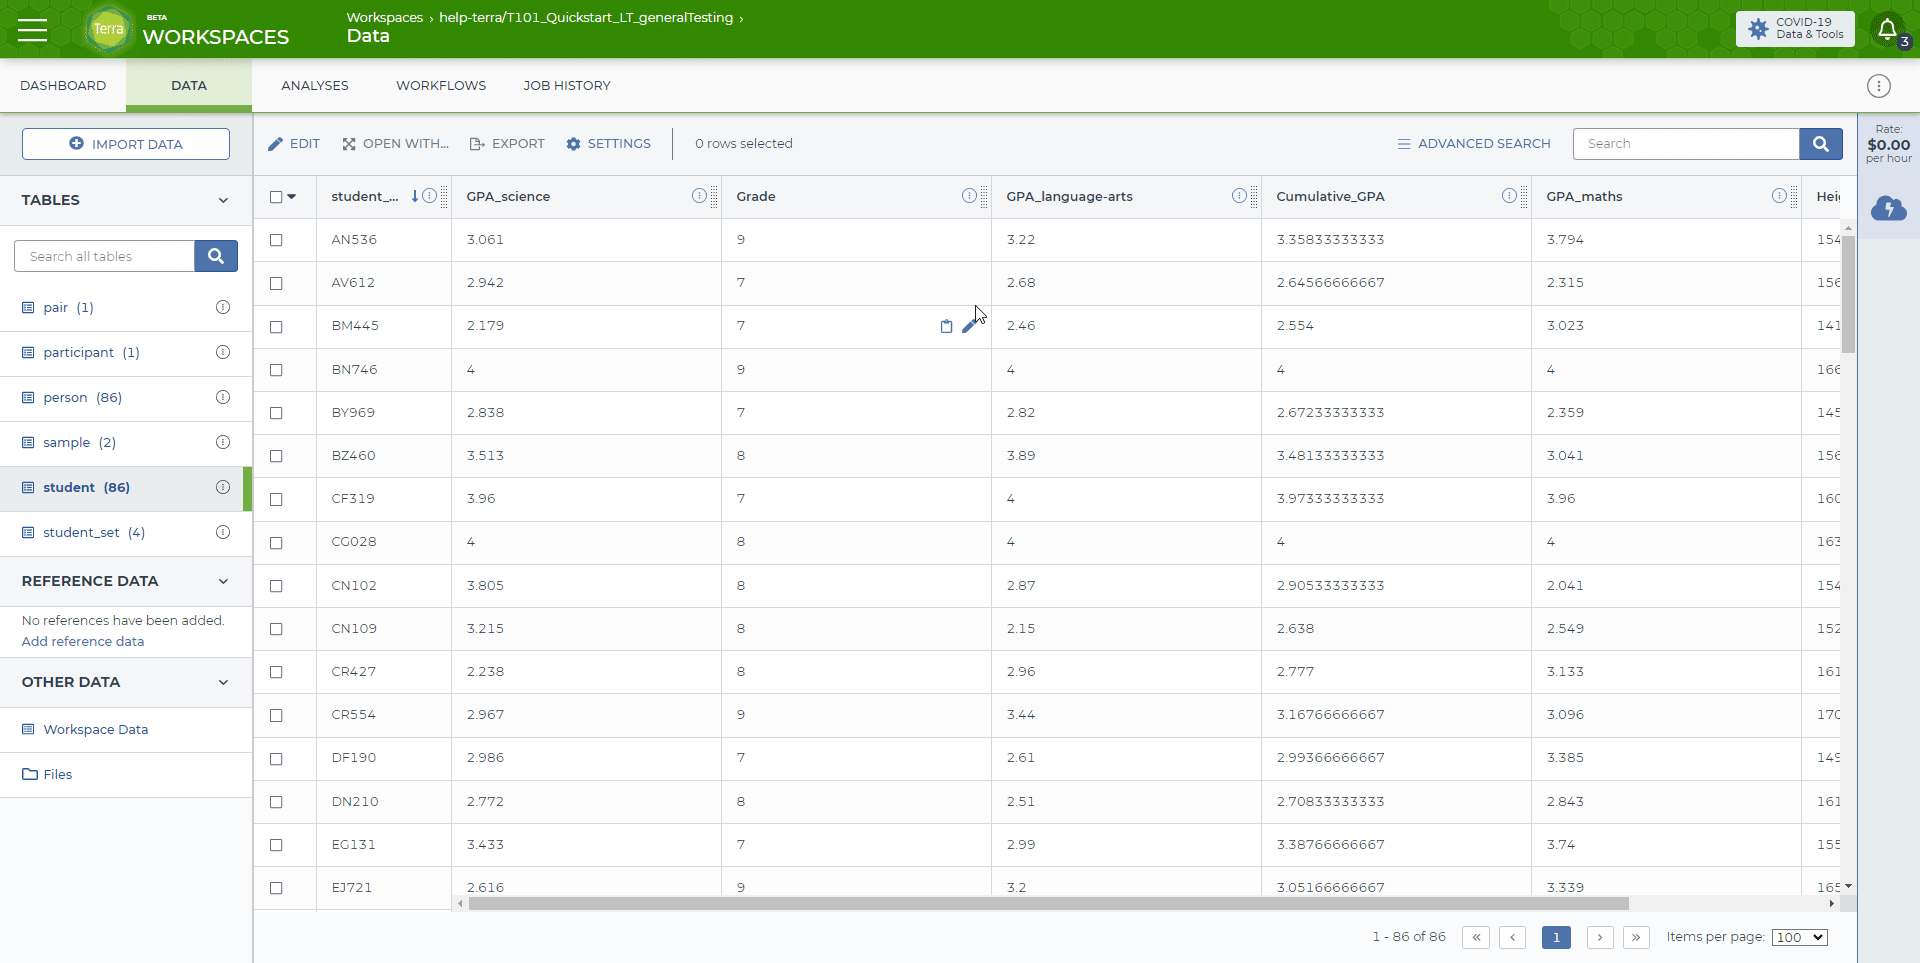 Screen capture showing how to change the order of the columns in a Terra data table. The user clicks on the 'Settings' button at the top of the table, chooses which columns to view, and re-arranges the columns by dragging and dropping the column names into the preferred order.